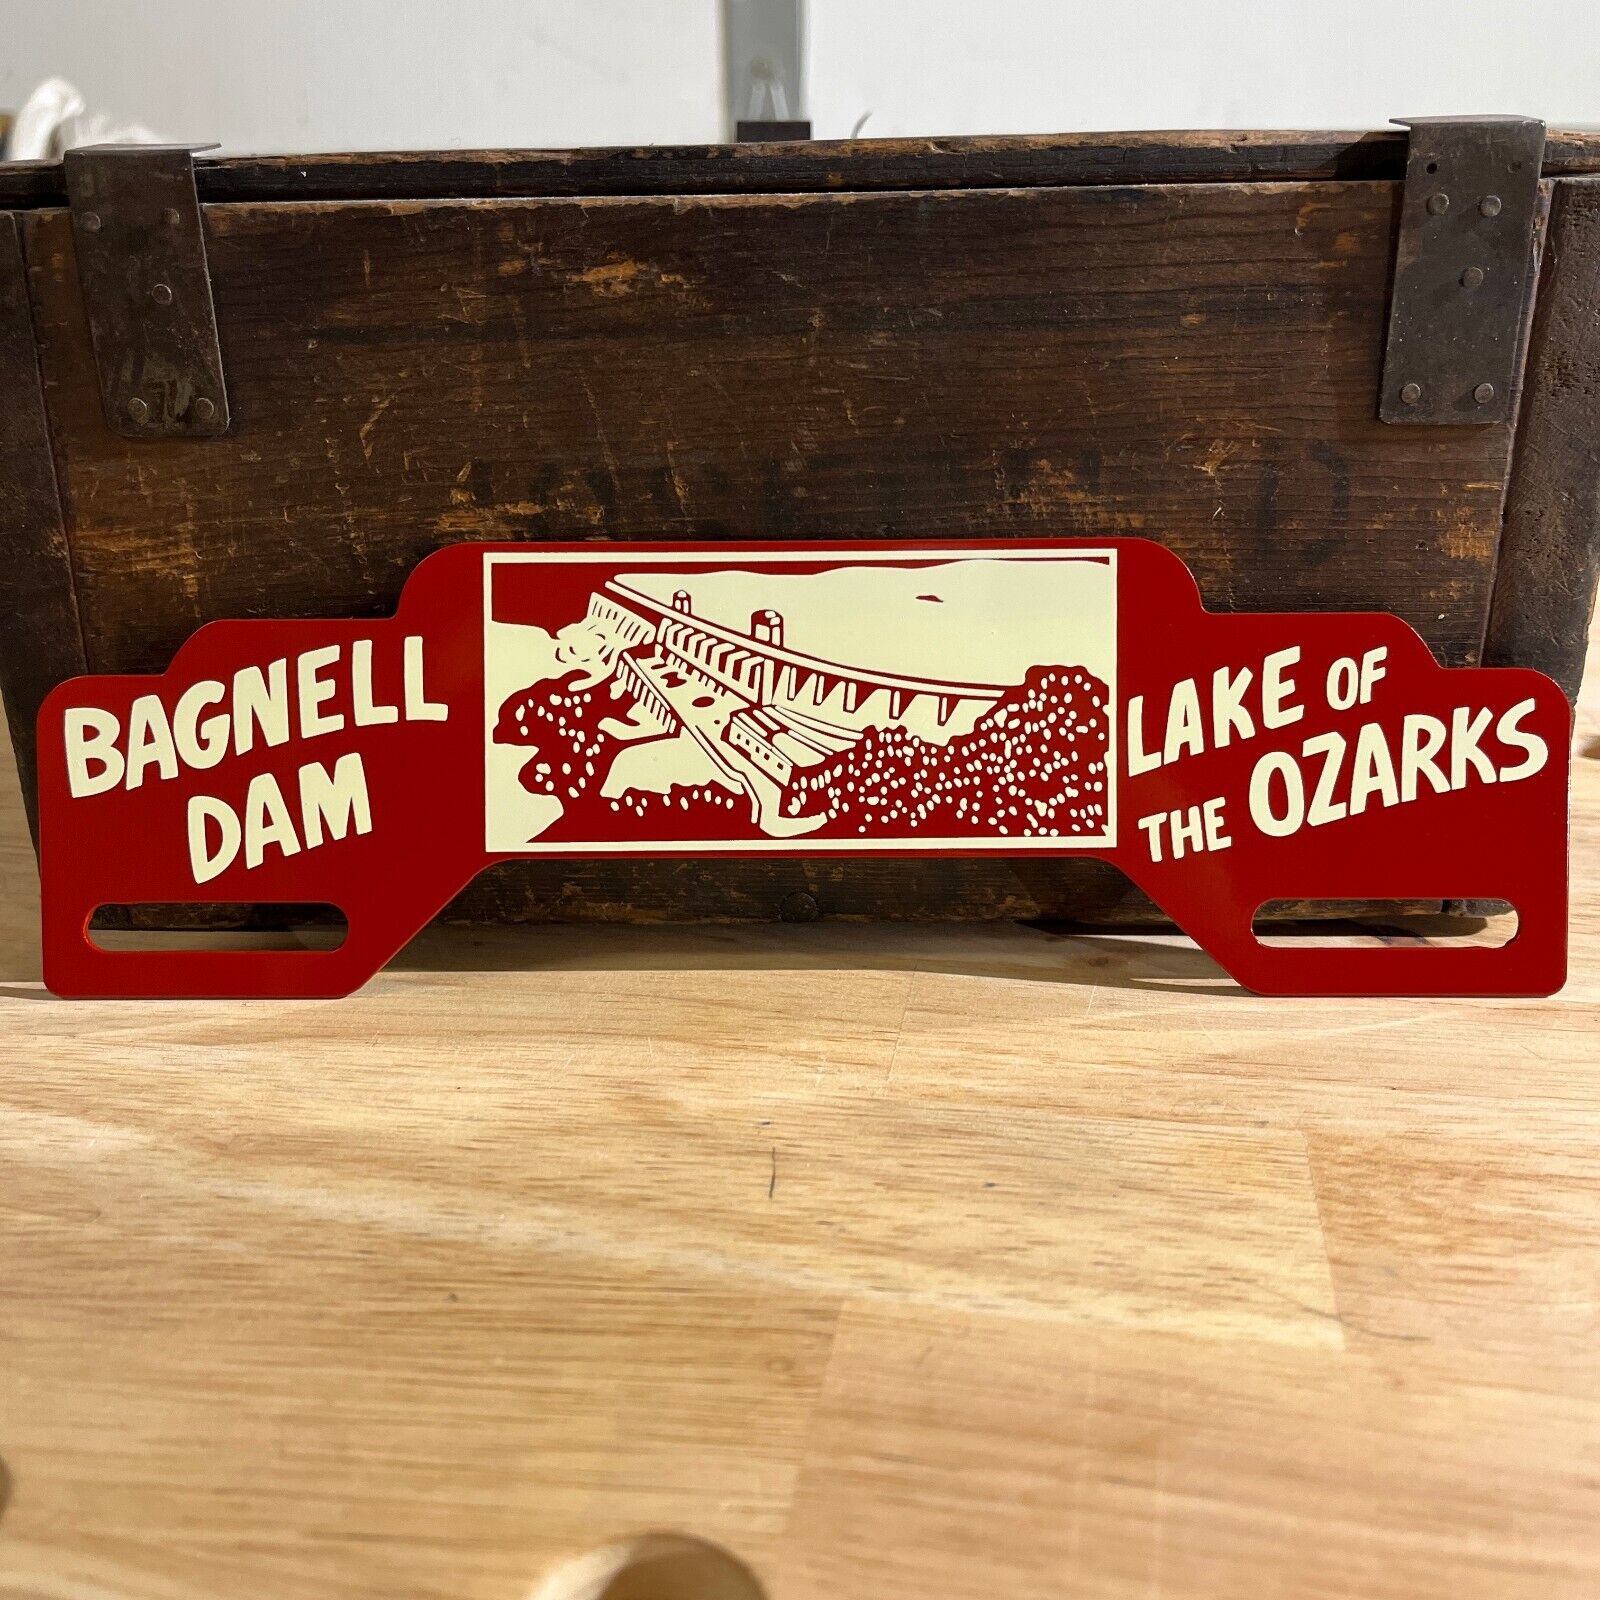 Bagnell Dam Lake Of The Ozarks Metal License Plate Topper Sign Tag Topper